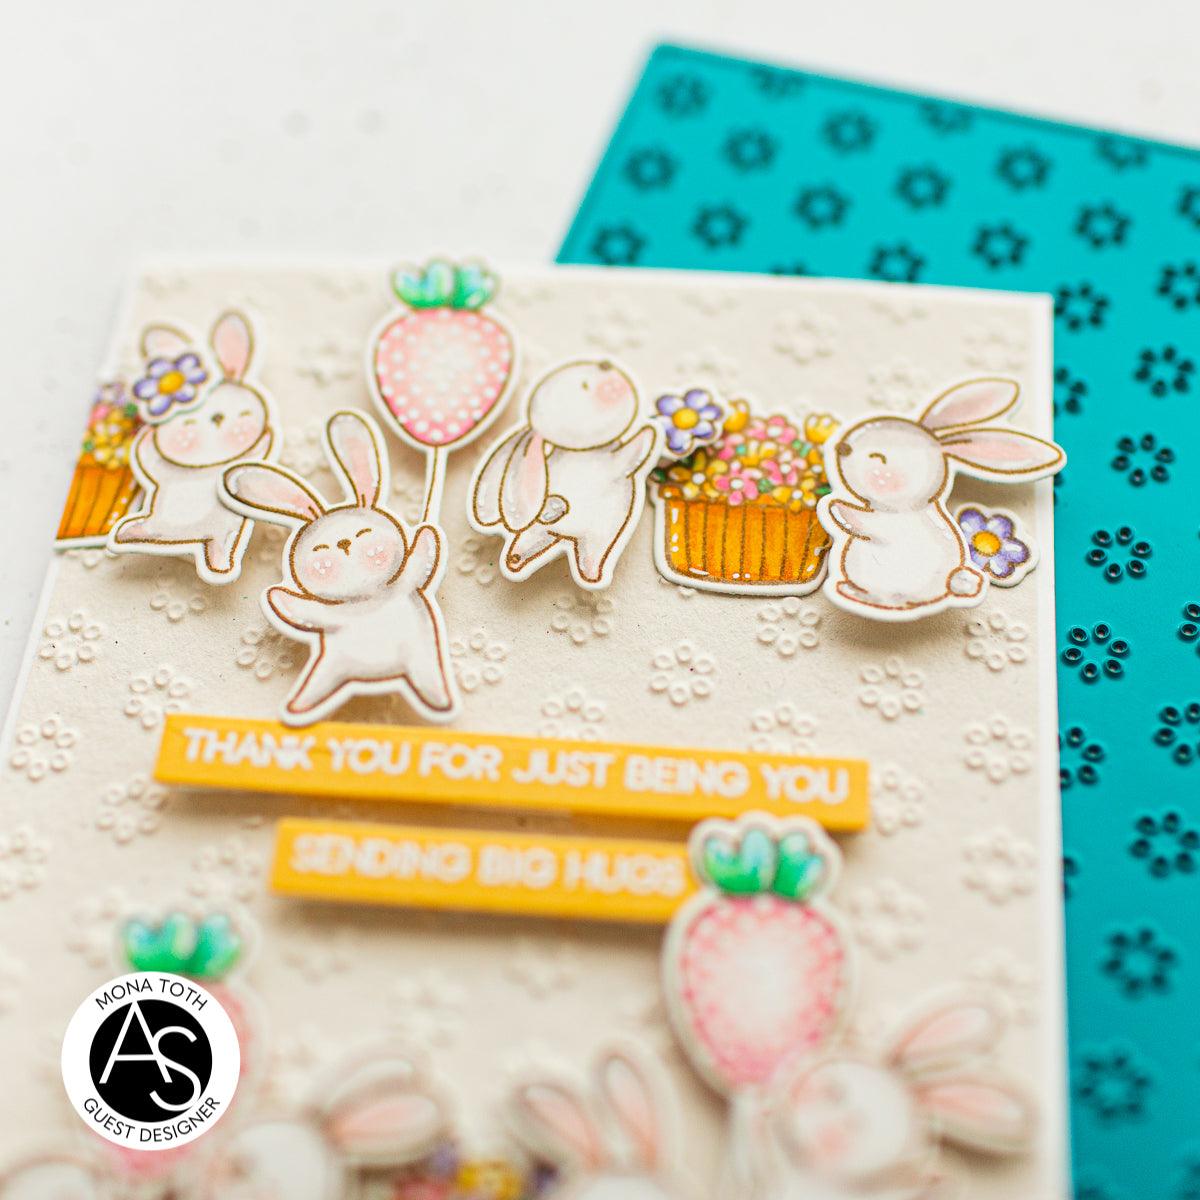 Expressing-Gratitude-Sentiments-Stamp-alex-syberia-designs-cardmaking-thankyou-cards-die-cutting-ideas-sentiments